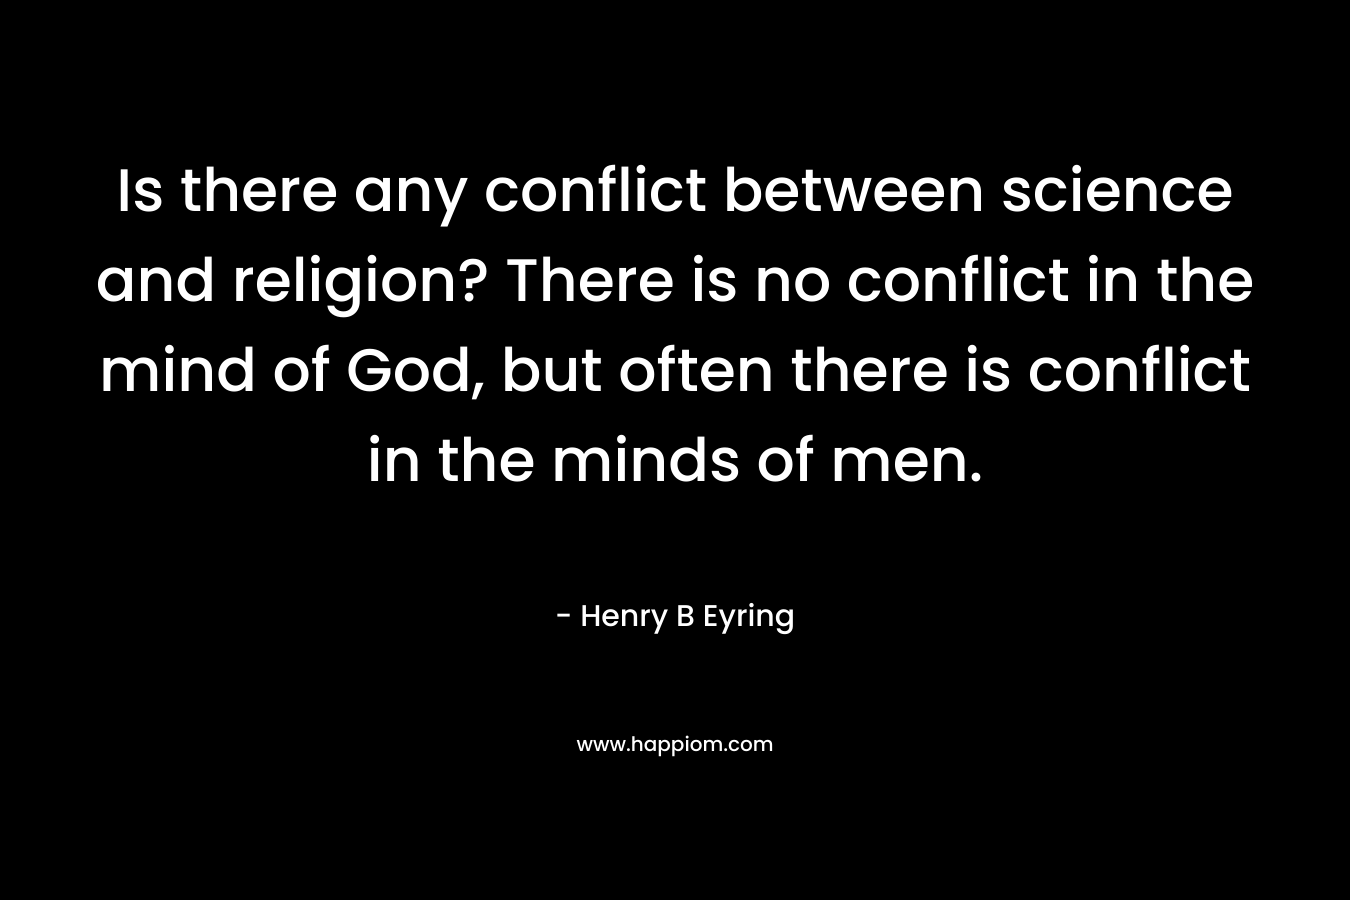 Is there any conflict between science and religion? There is no conflict in the mind of God, but often there is conflict in the minds of men. – Henry B Eyring